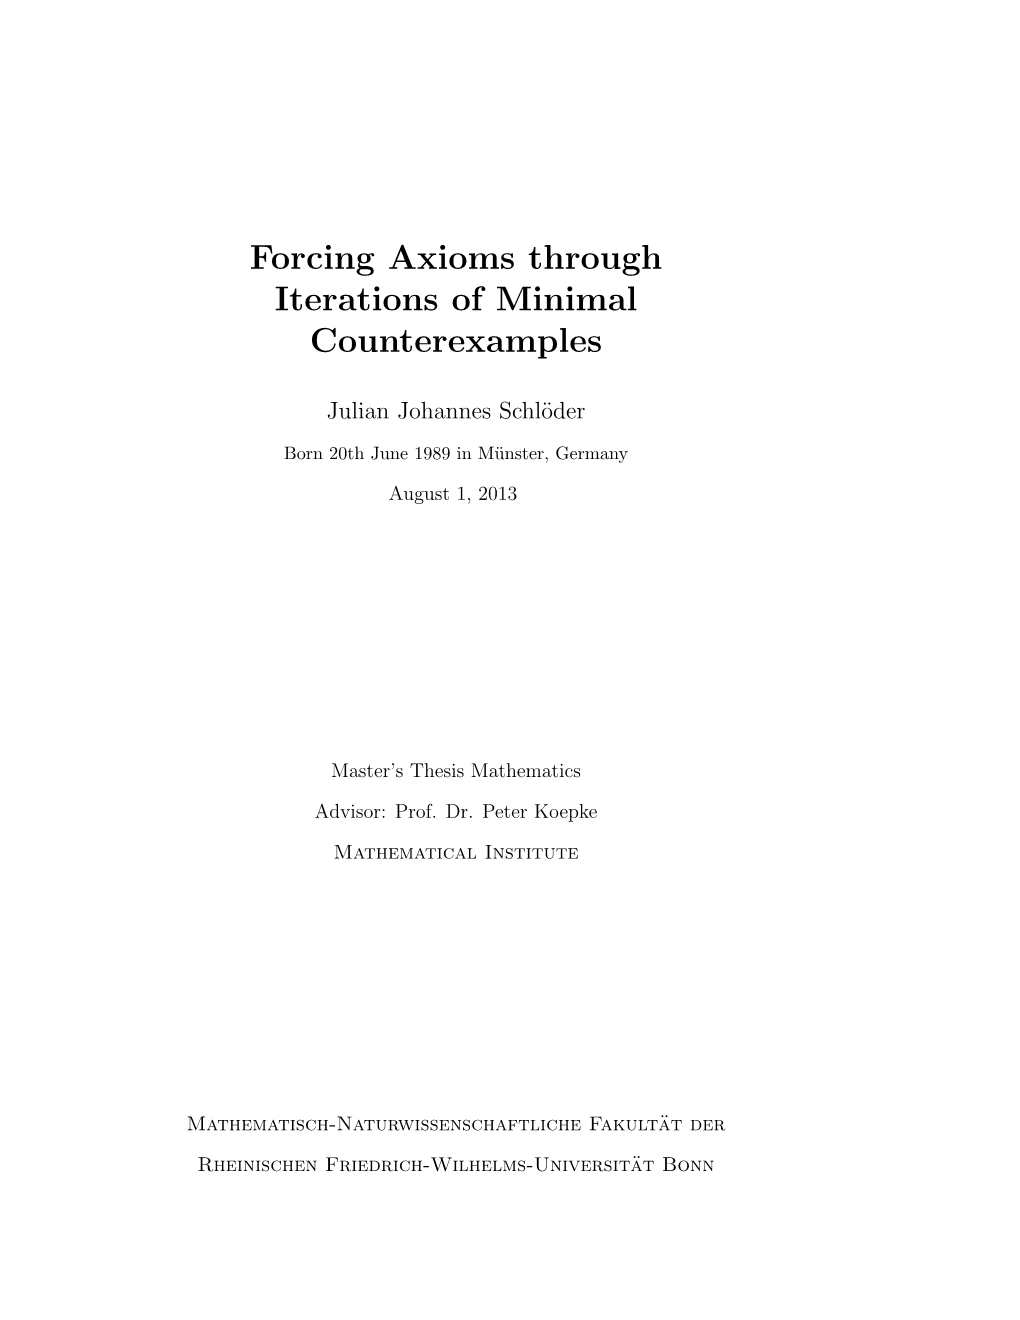 Forcing Axioms Through Iterations of Minimal Counterexamples